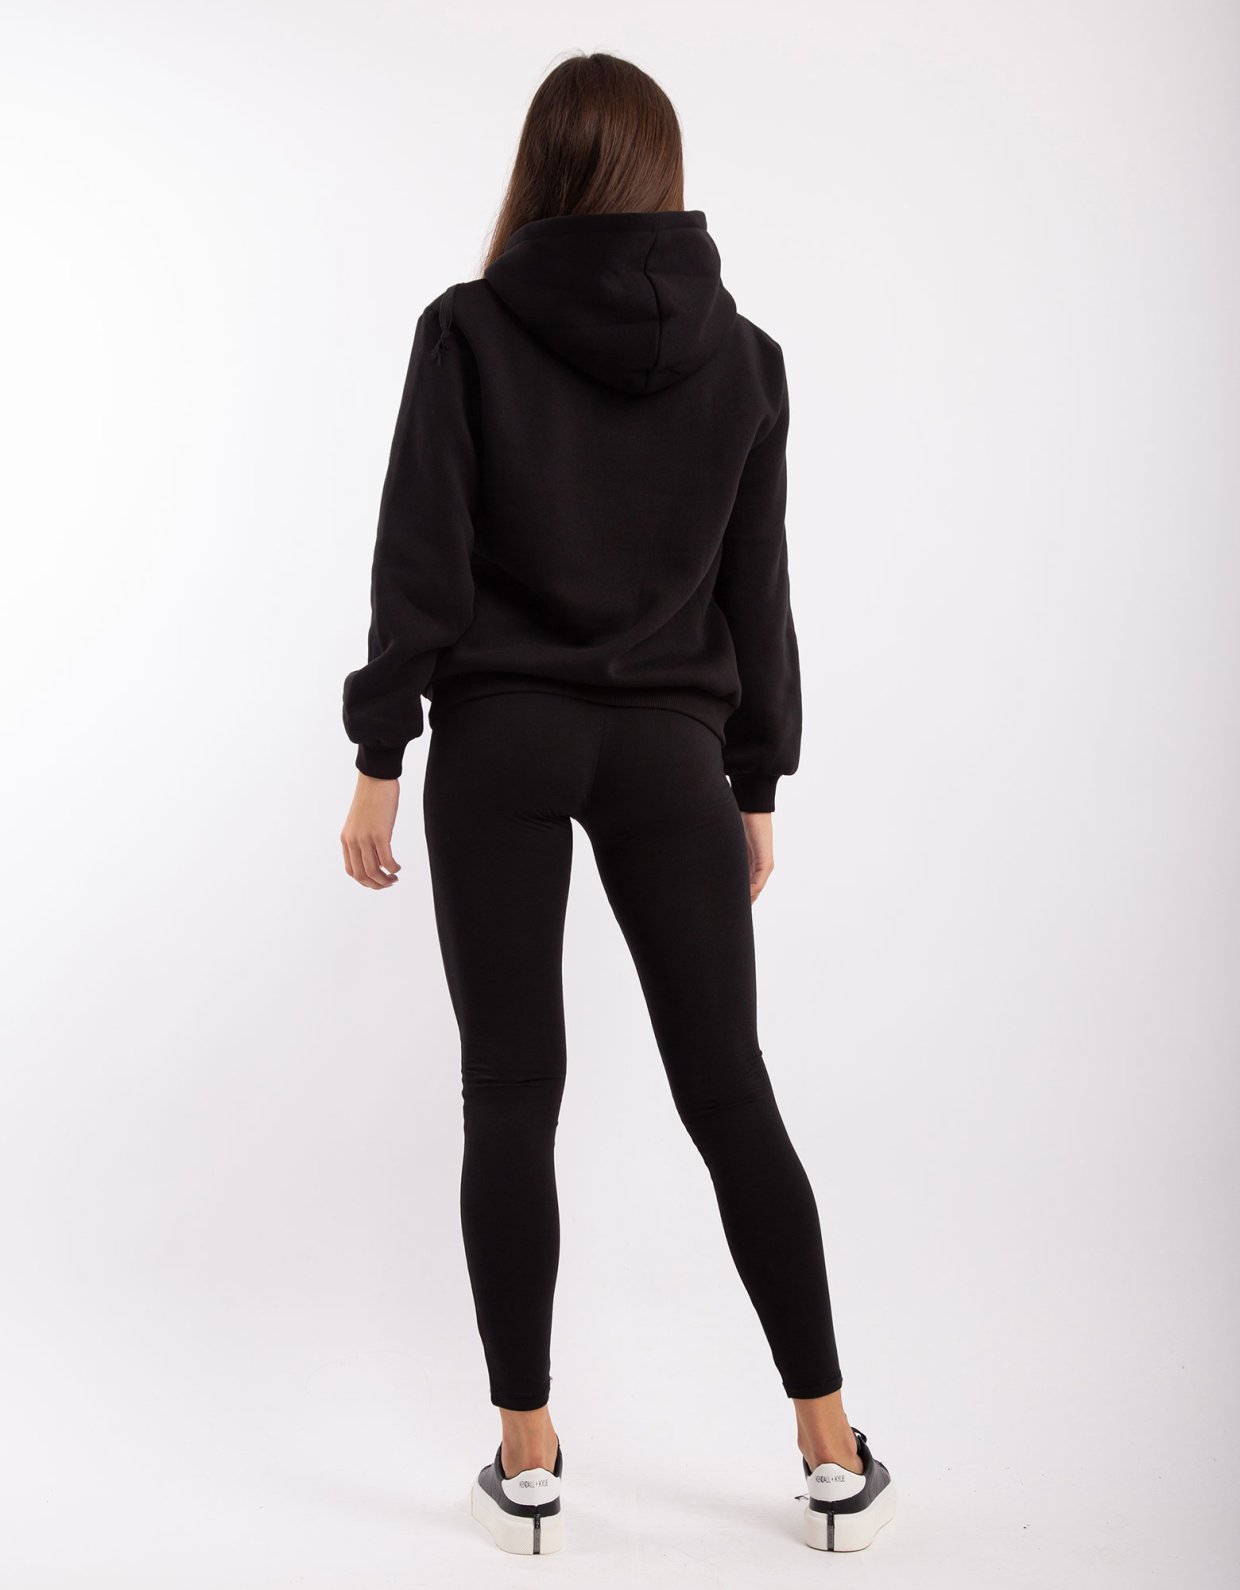 Kendall + Kylie Active hoody sweater classic black